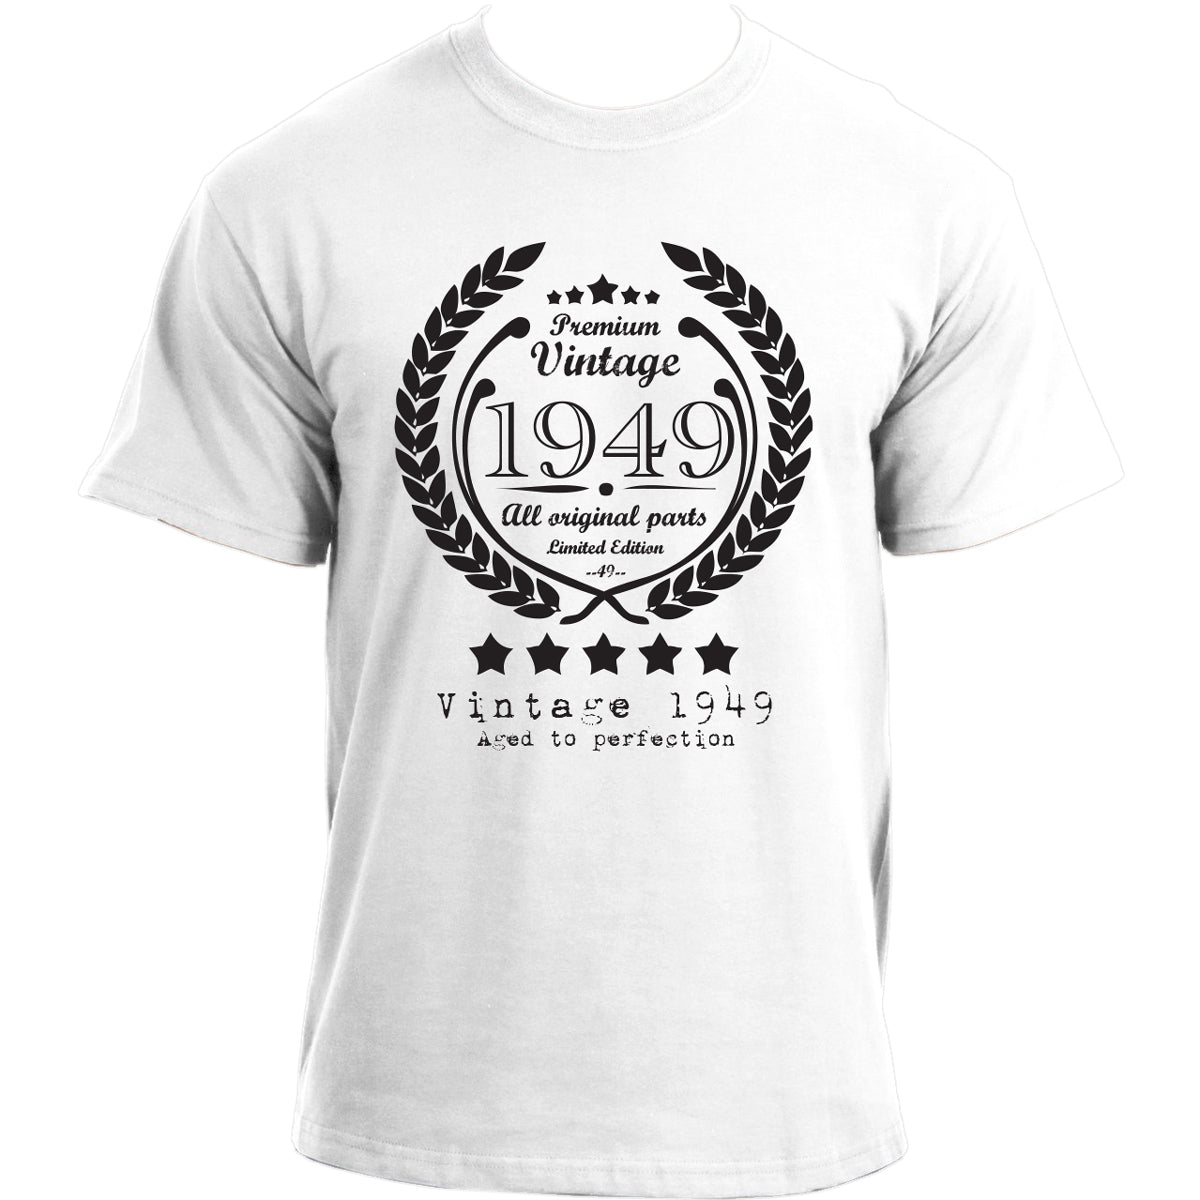 Premium Vintage 1949 Aged to Perfection Limited Edition Birthday Present Mens t-shirt